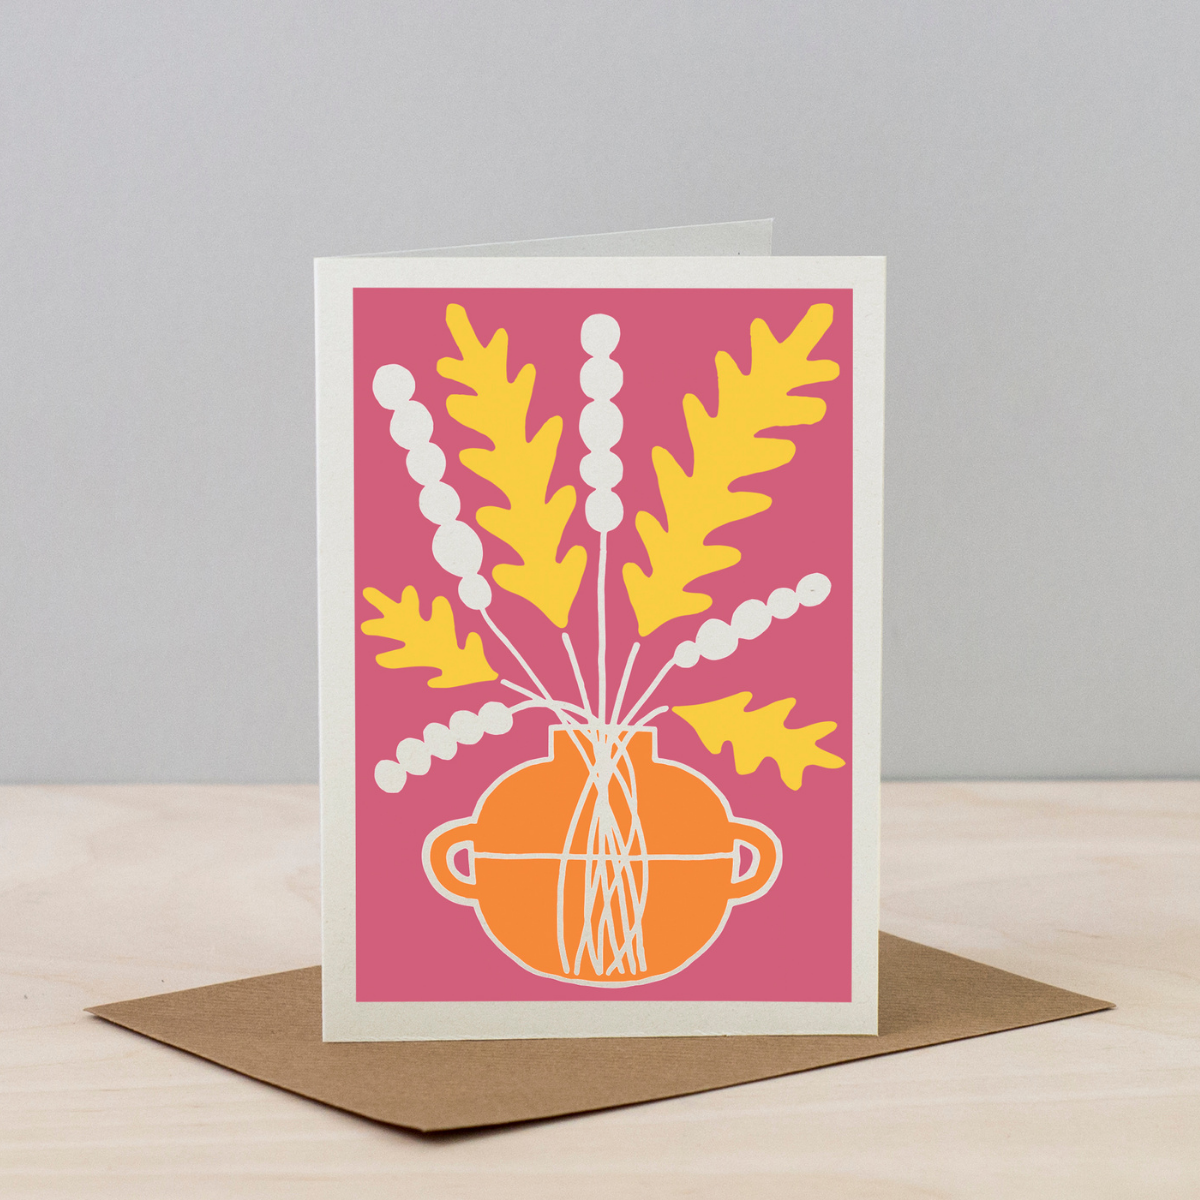 All Occasions Greetings Card - Leaf